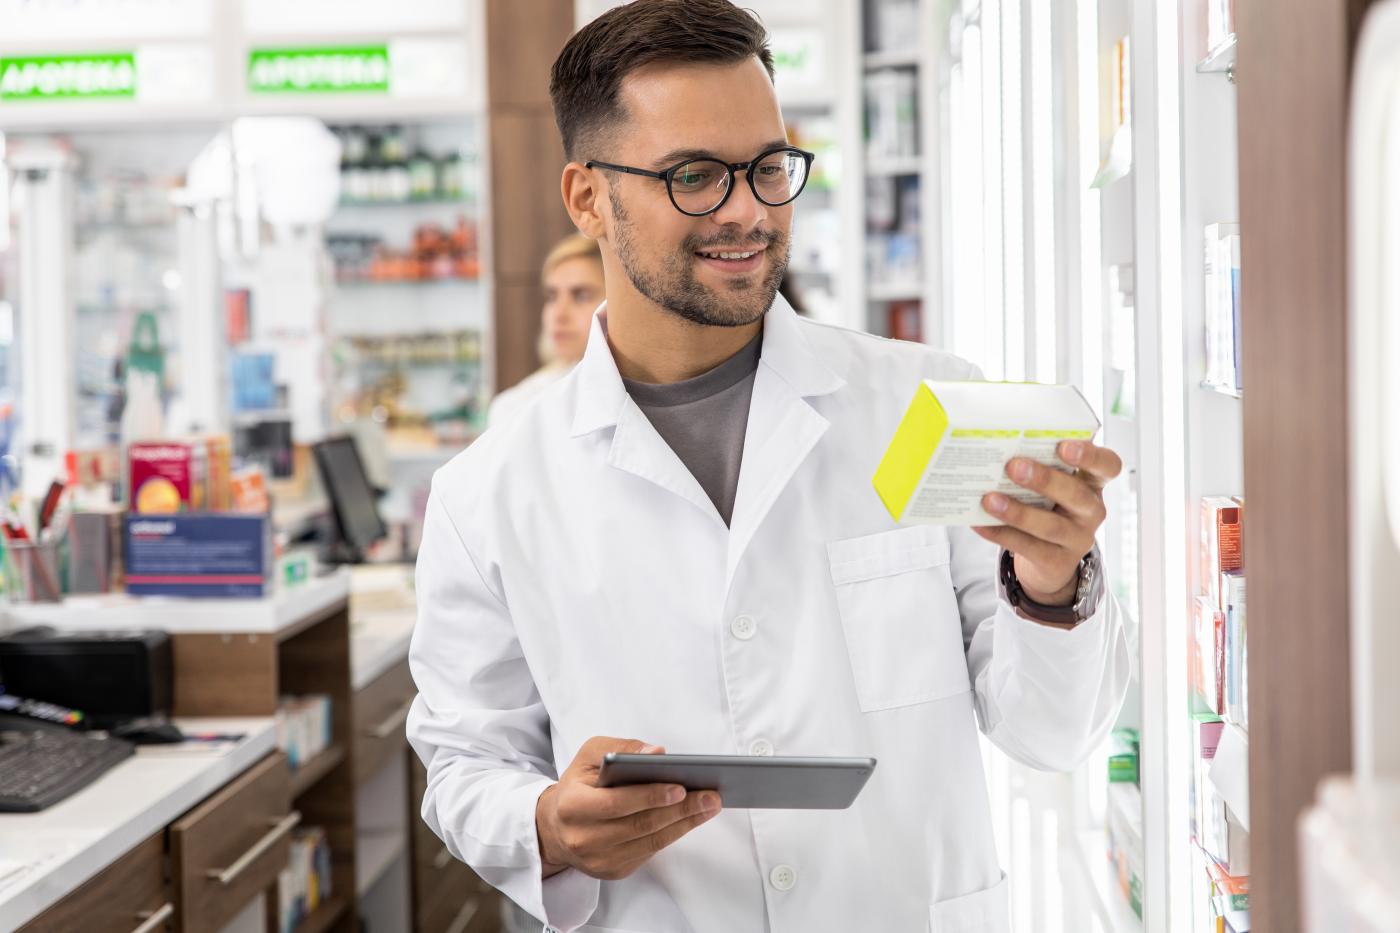 Pharmacist looks at and holds small box in left hand